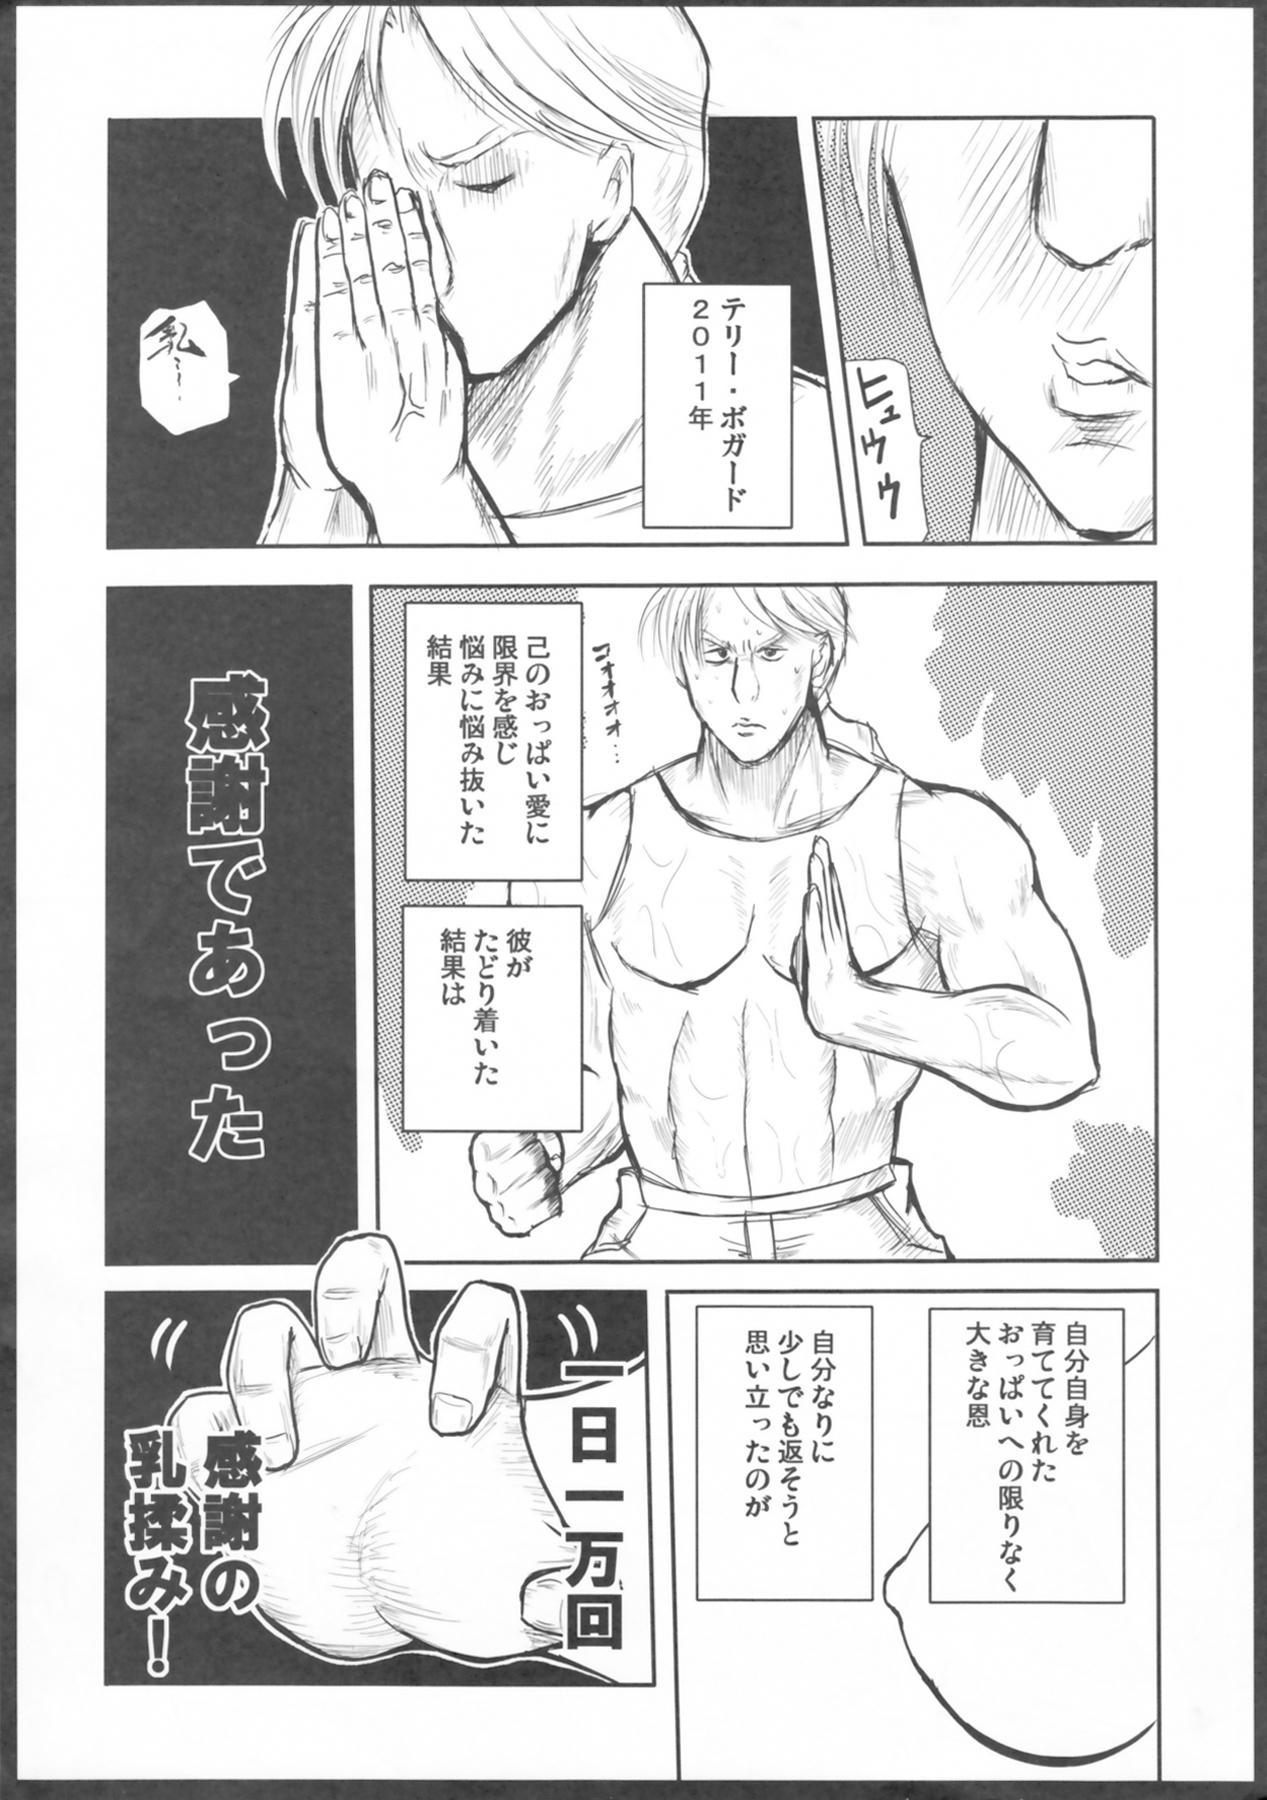 Spycam Milk Triple Ecstasy - King of fighters Fatal fury Taiwan - Page 5